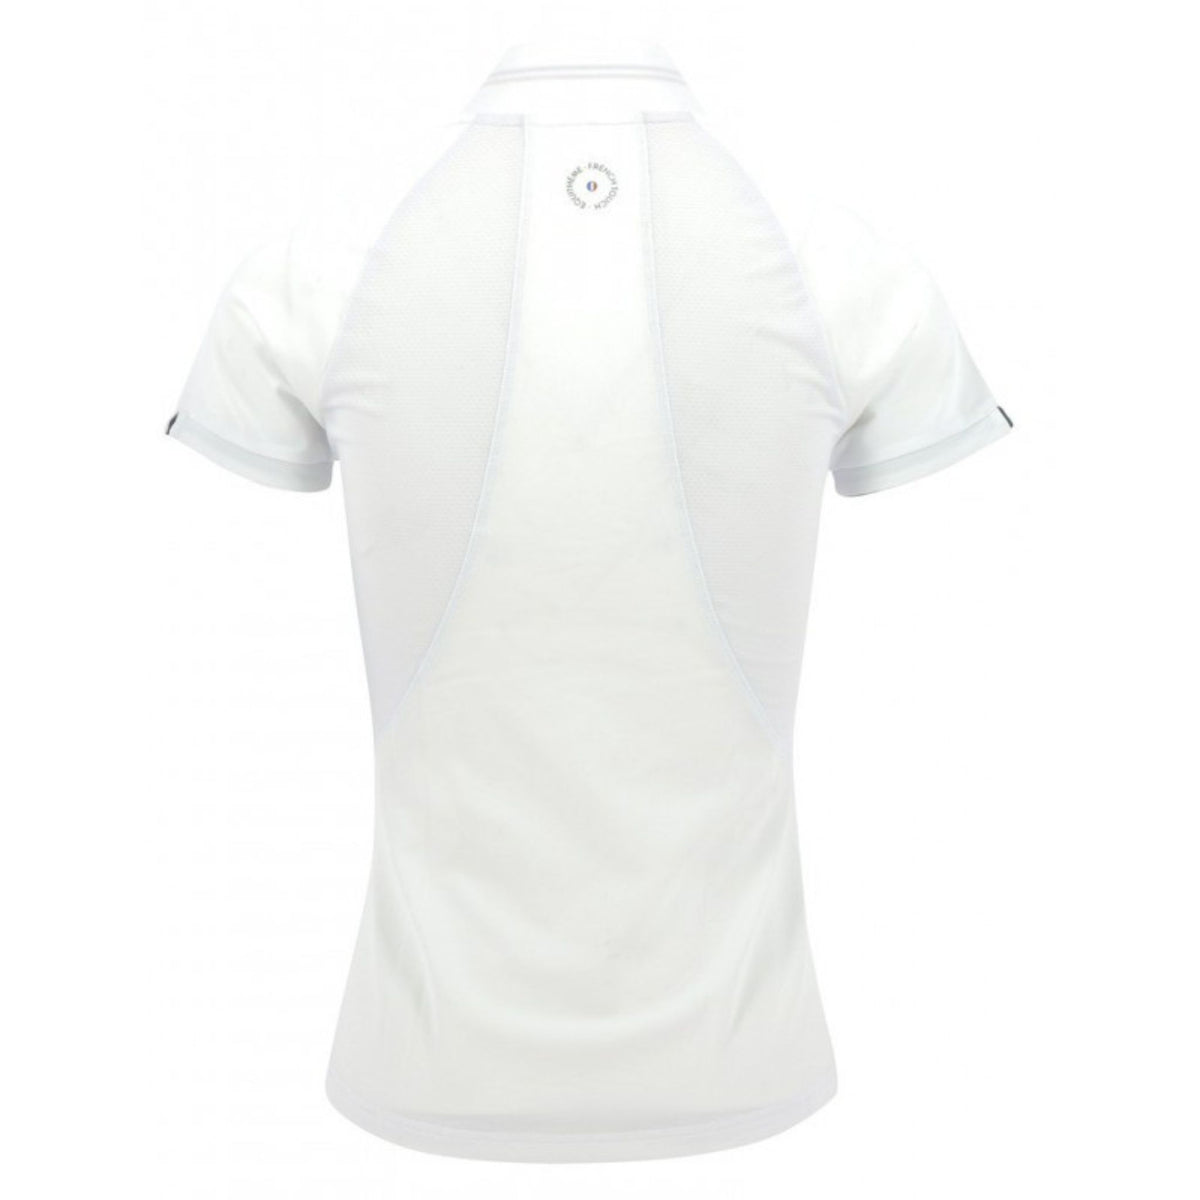 Back of the white polo with mesh panels and Equitheme logo